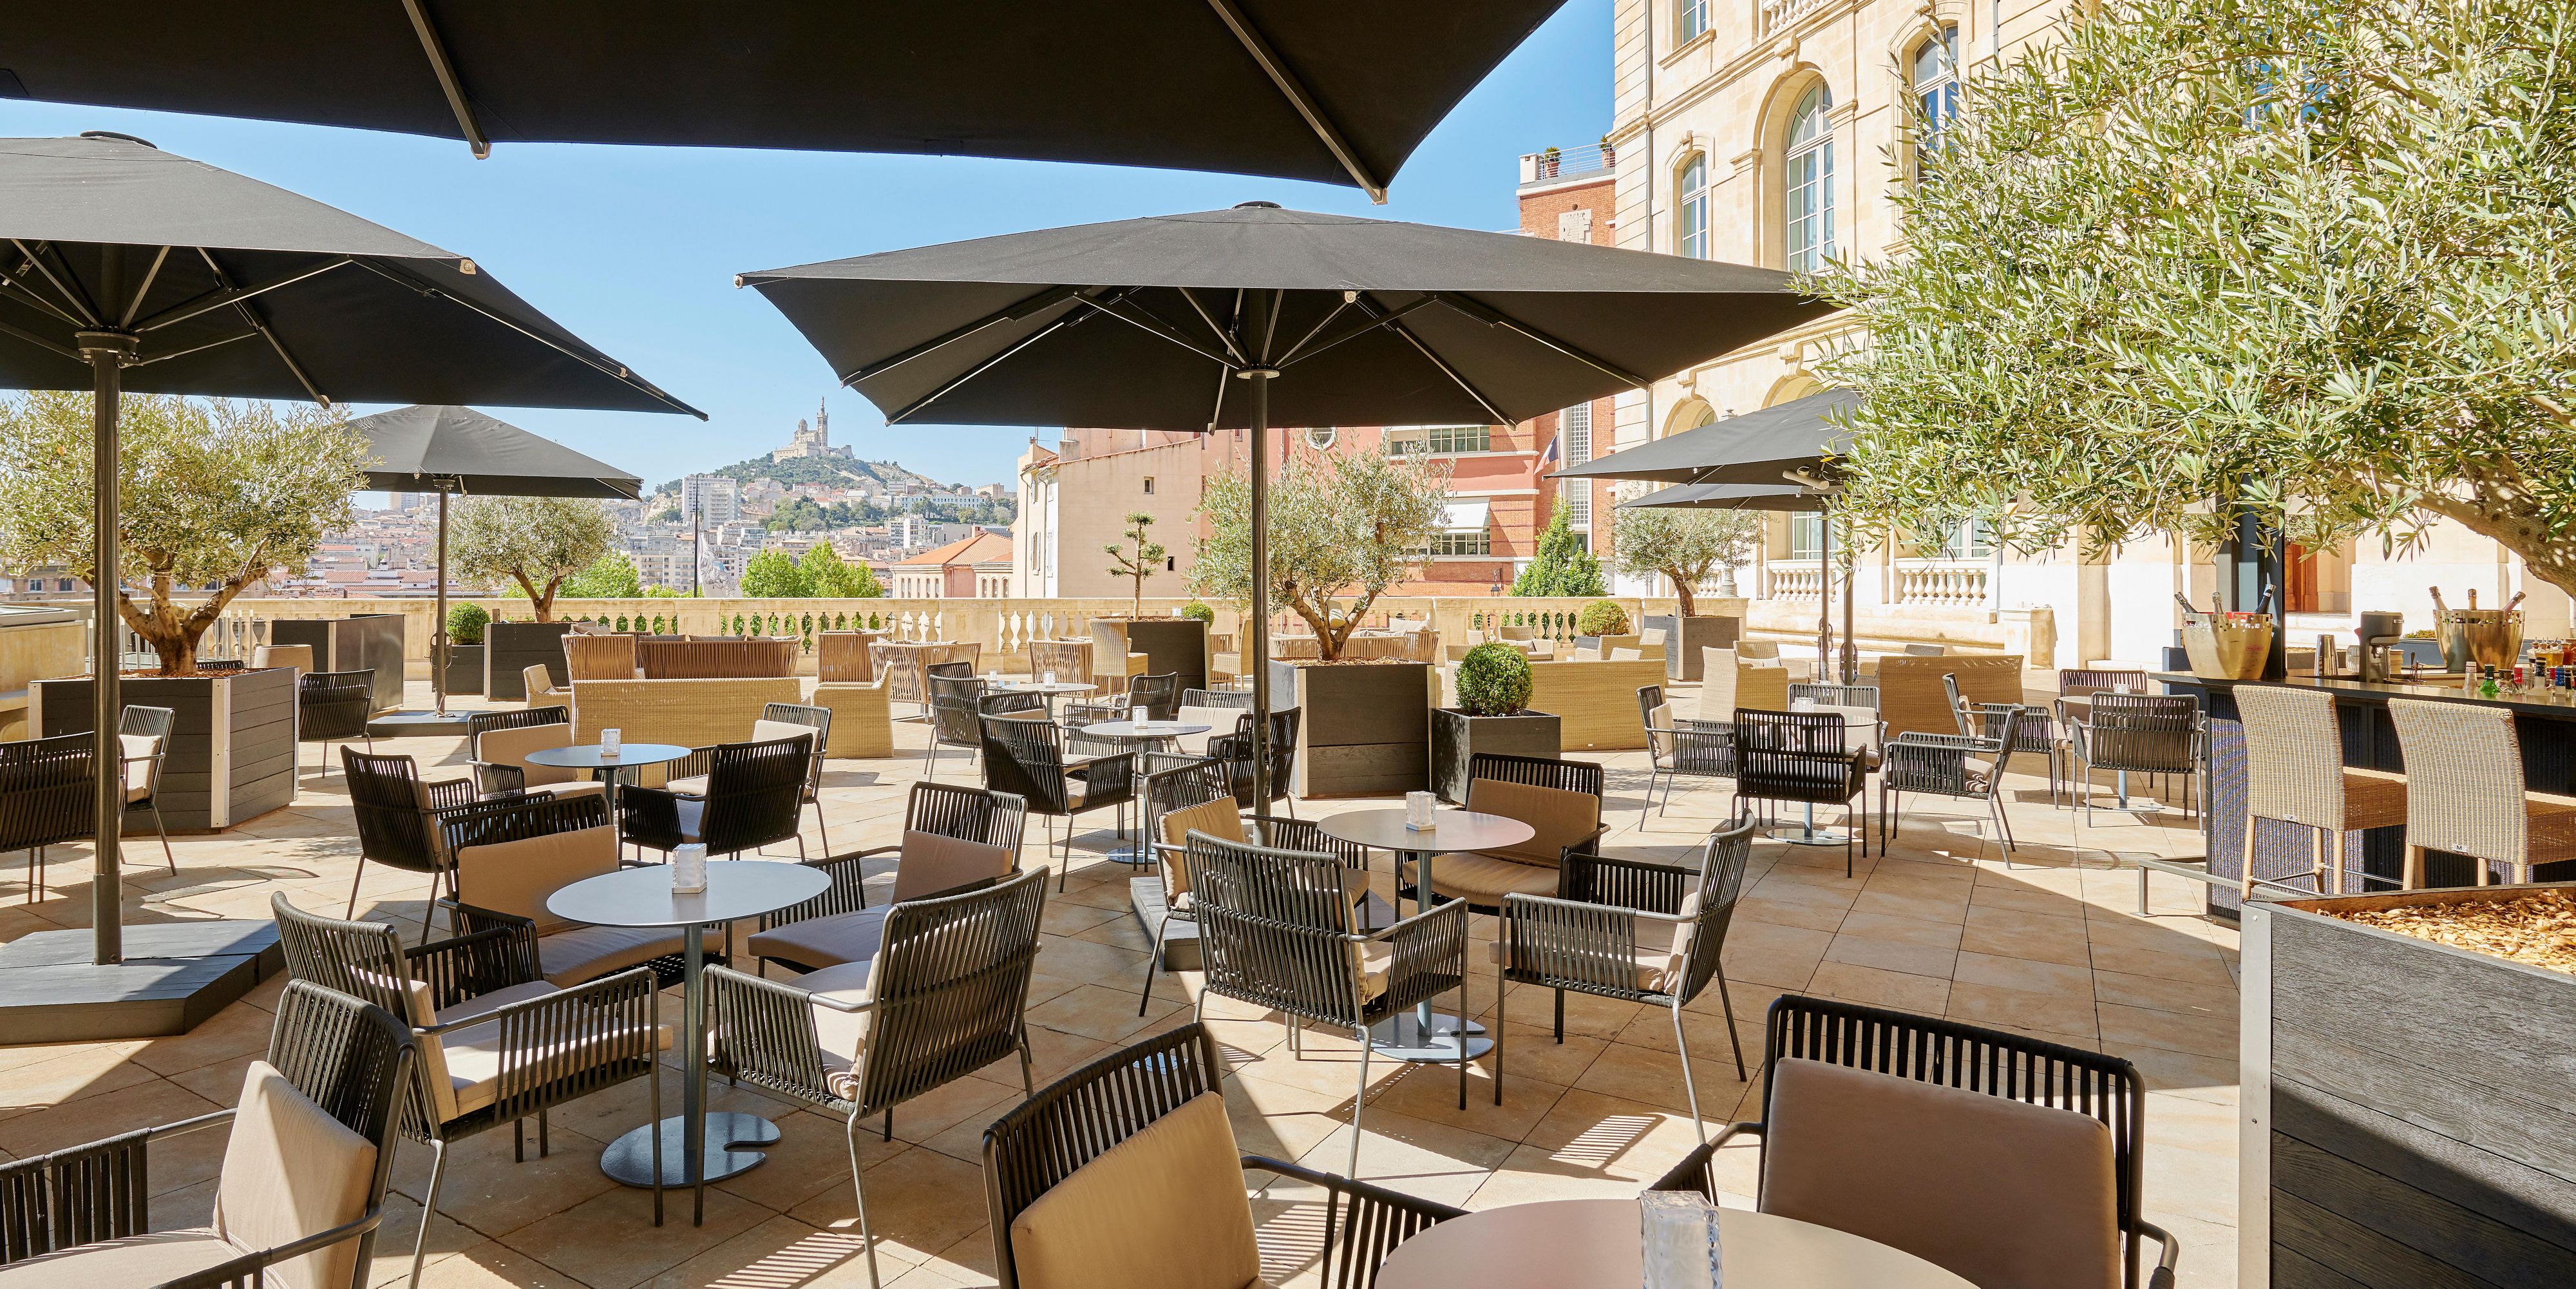 Our sunny terrace is now open. Modern and convivial Mediterranean cuisine is waiting for you at Les Fenêtres brasserie. Or enjoy a snack and a beverage at the Capian bar.